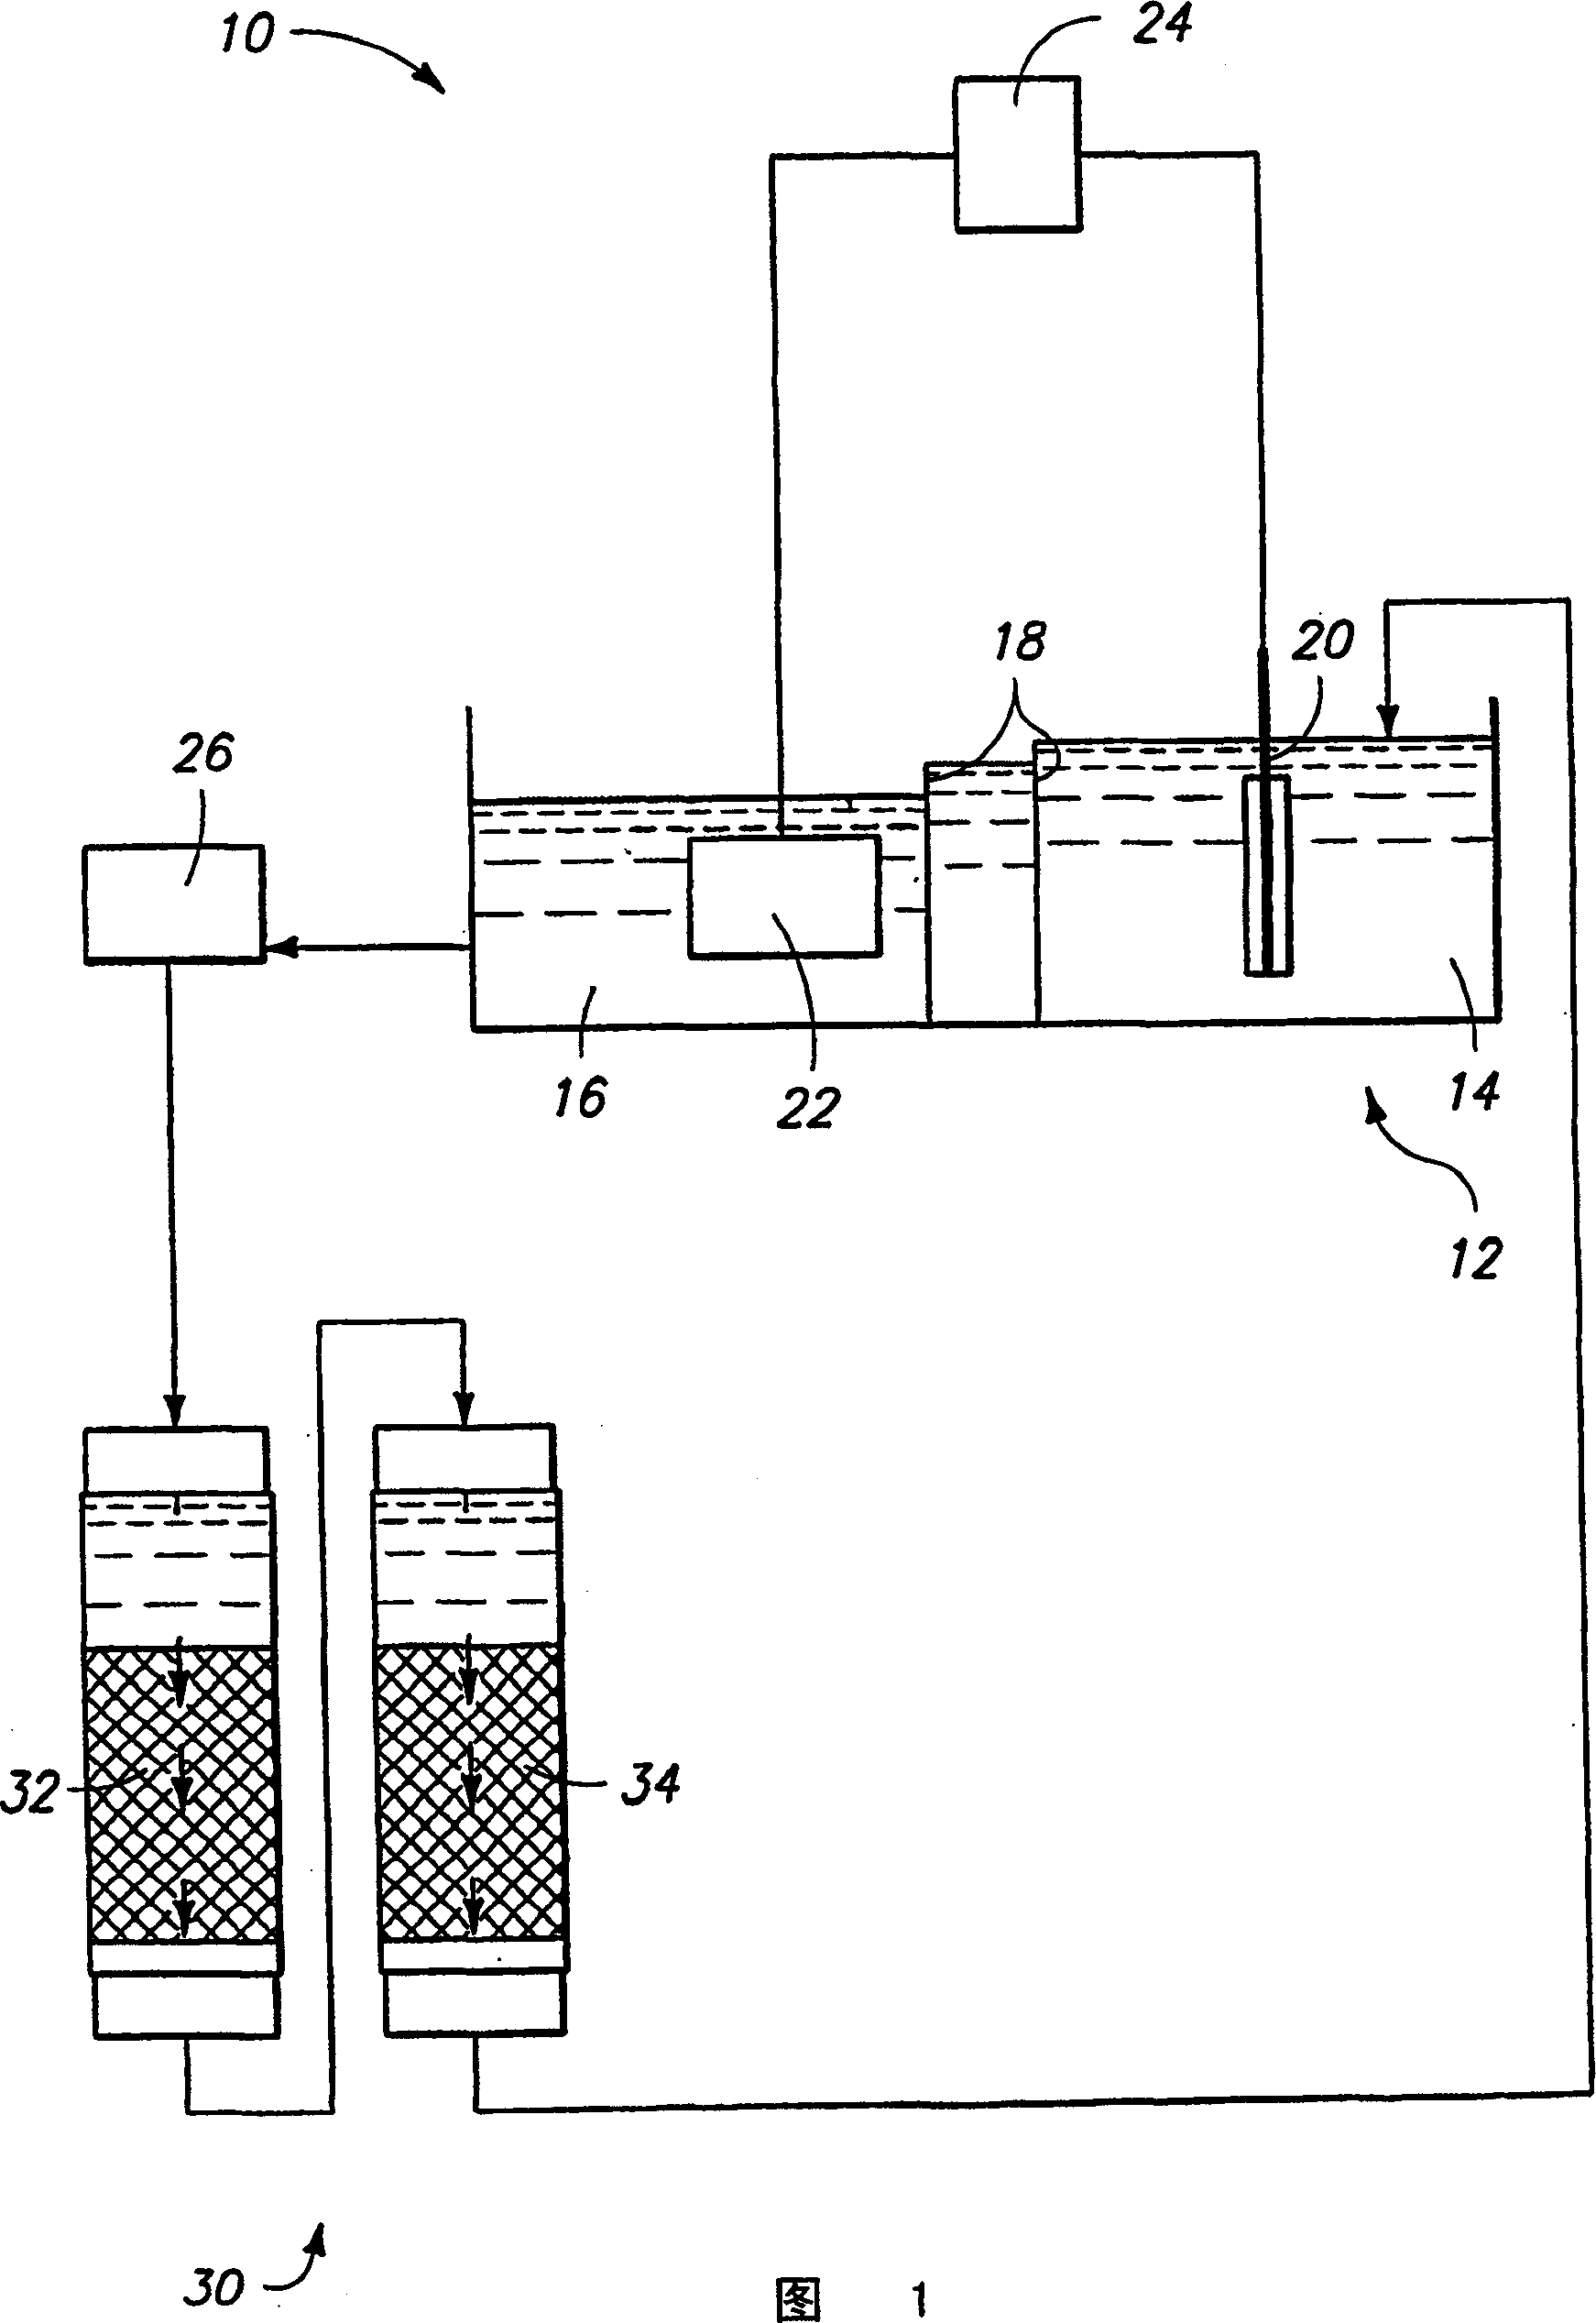 Method and apparatus for processing metals, and the metals so produced